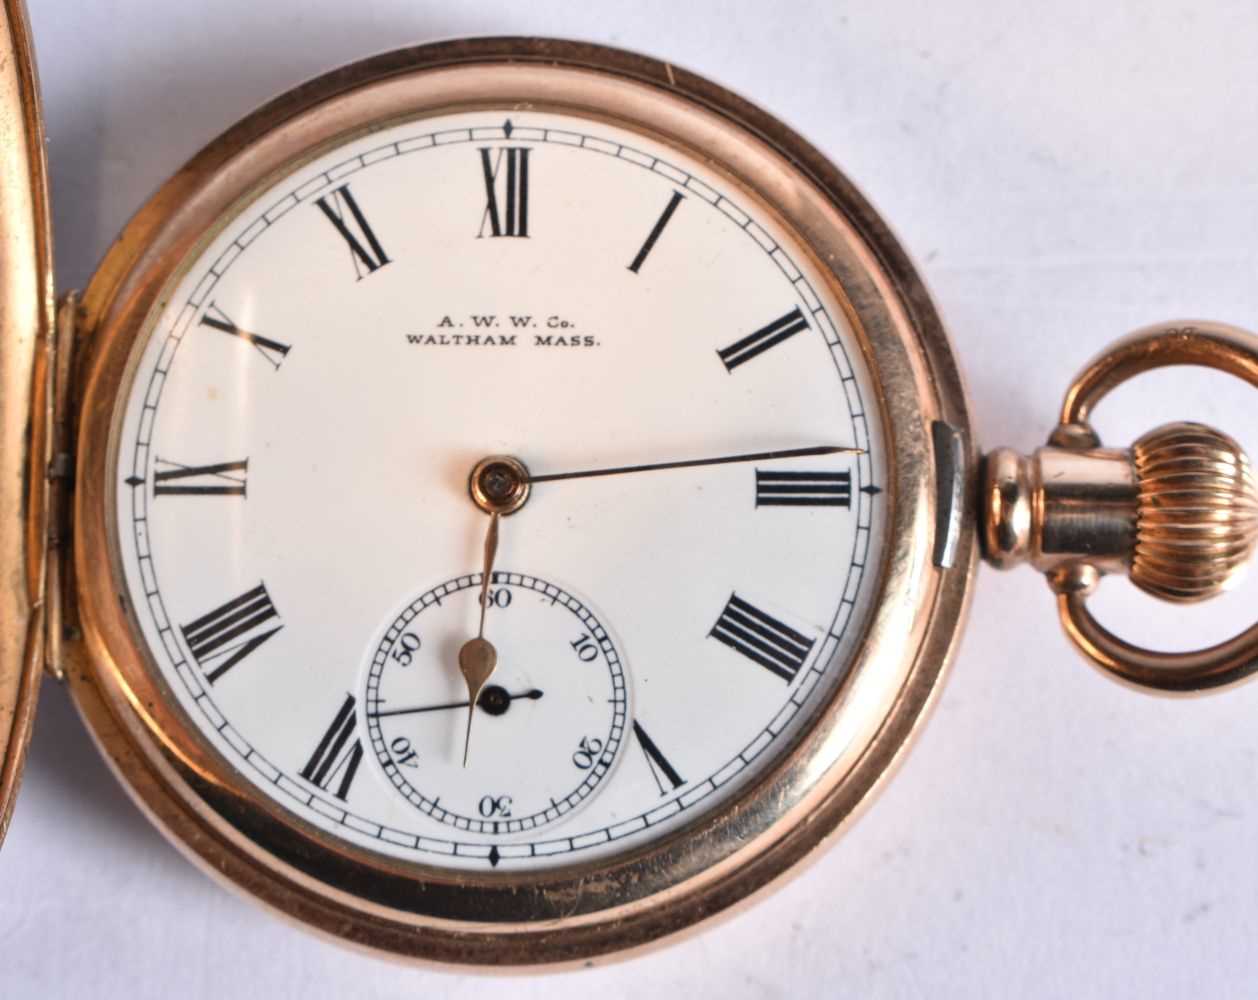 WALTHAM Gents Rolled Gold Full Hunter Pocket Watch. Movement - Hand-wind. WORKING - Tested For Time.